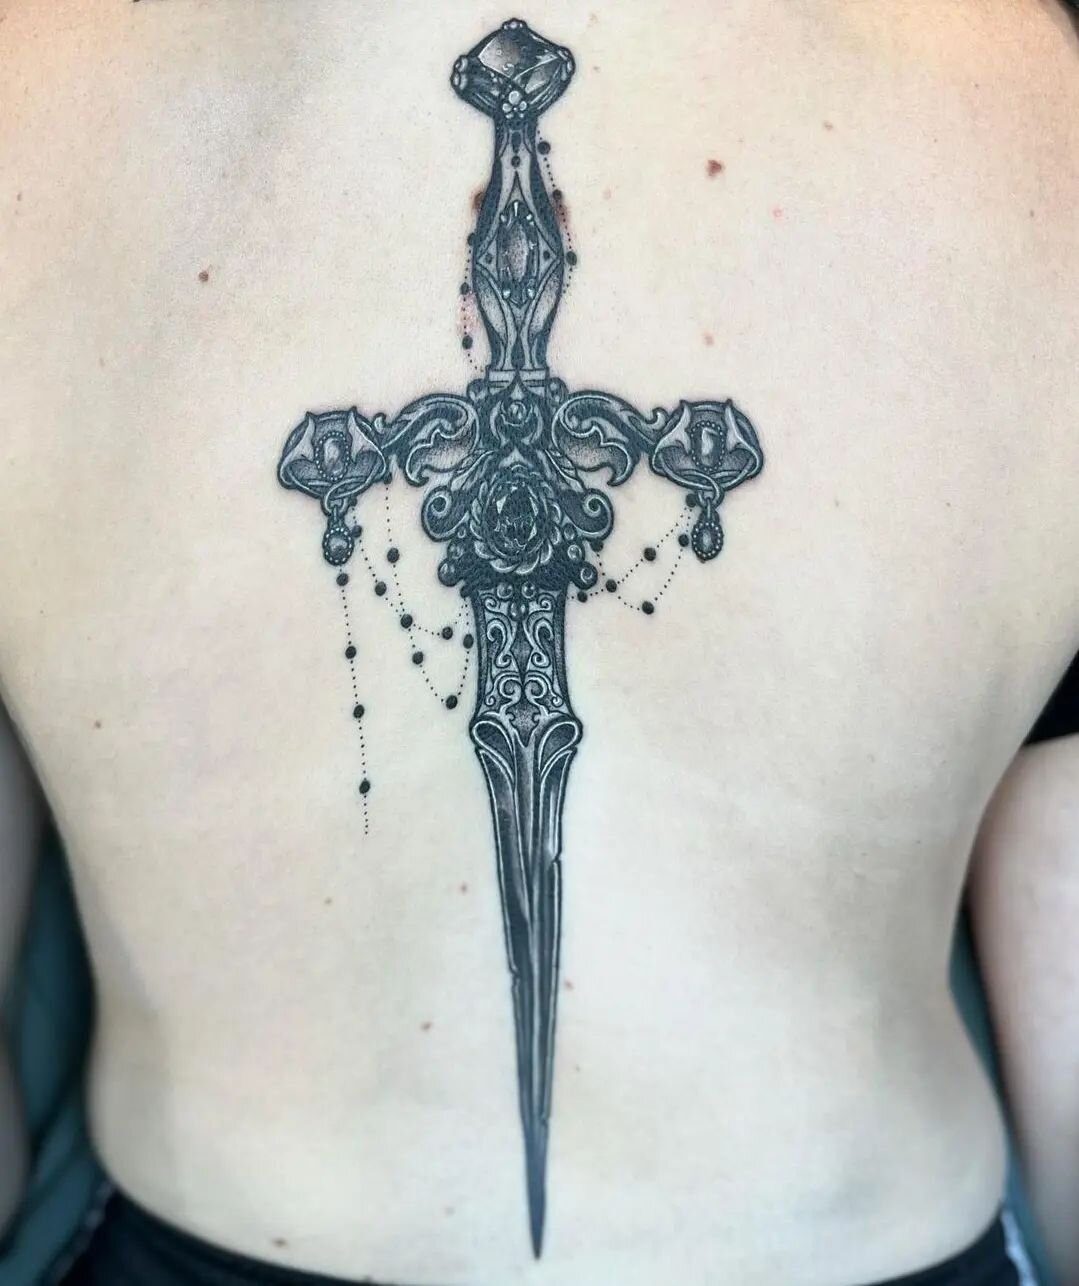 Check out this gorgeous Jeweled Dagger by @carolinemaetattoos It's mostly healed with a few finishing touches to the jewels. 
.
.
#chicolousfinetattoos #gatattoos #gatattooer #atlantatattooer #athenstattooshops #ladytattooers #daggertattoo #finelinet